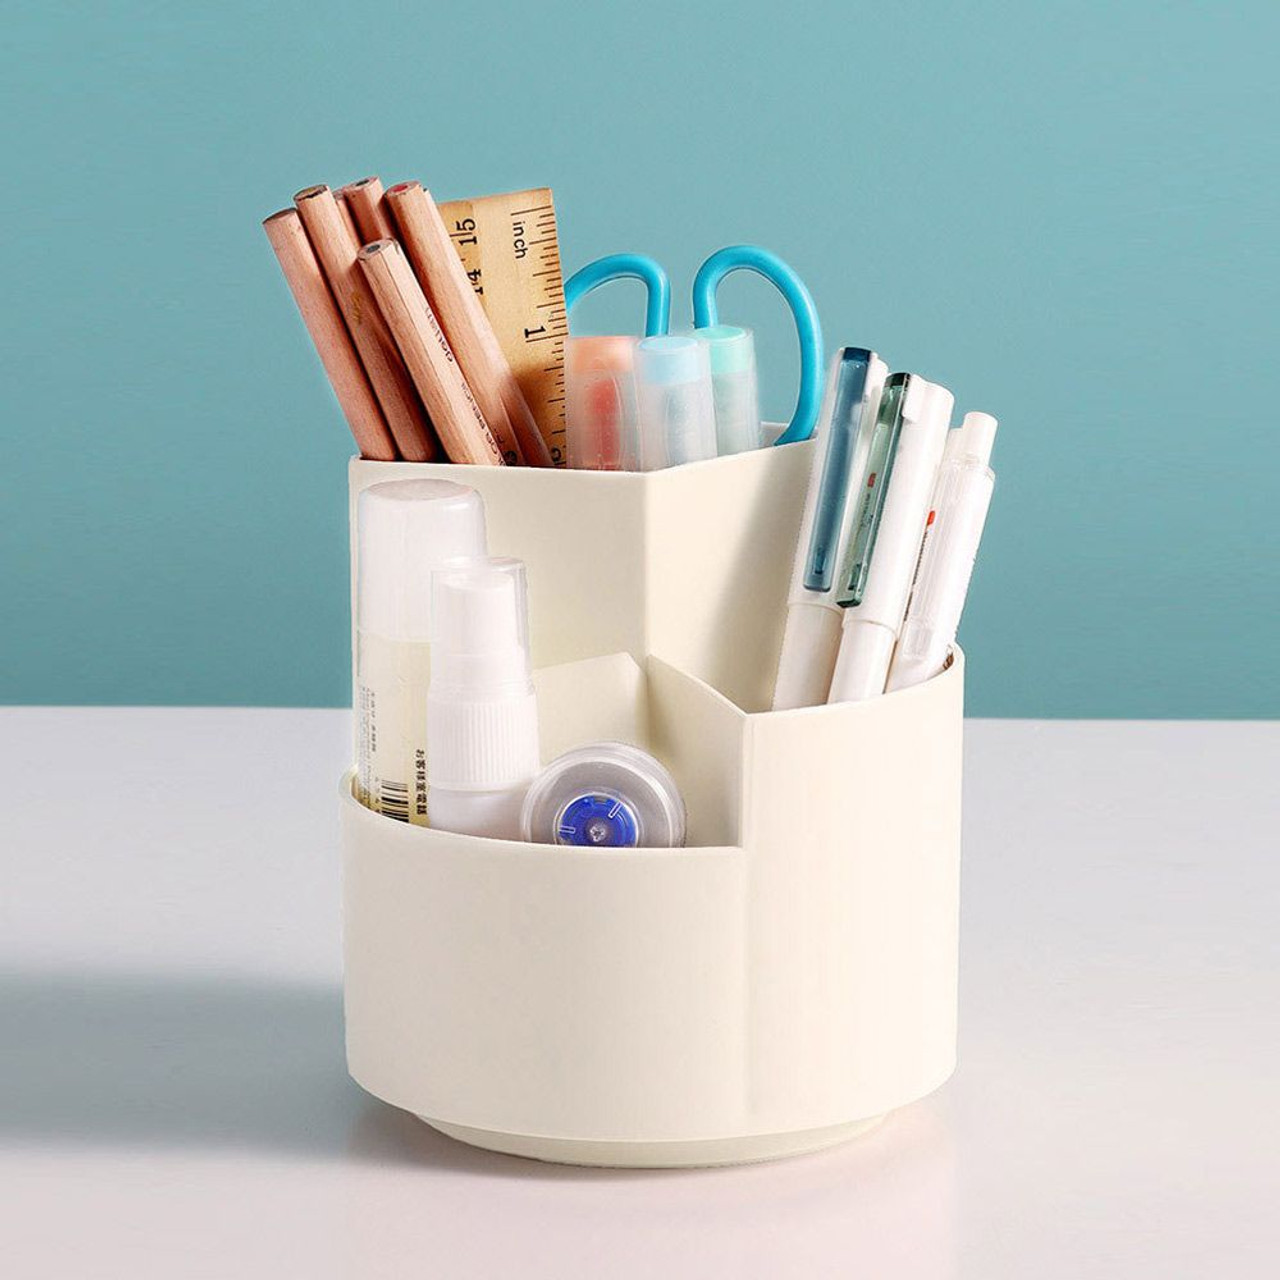 Stand-Up Pencil / Pen Holder